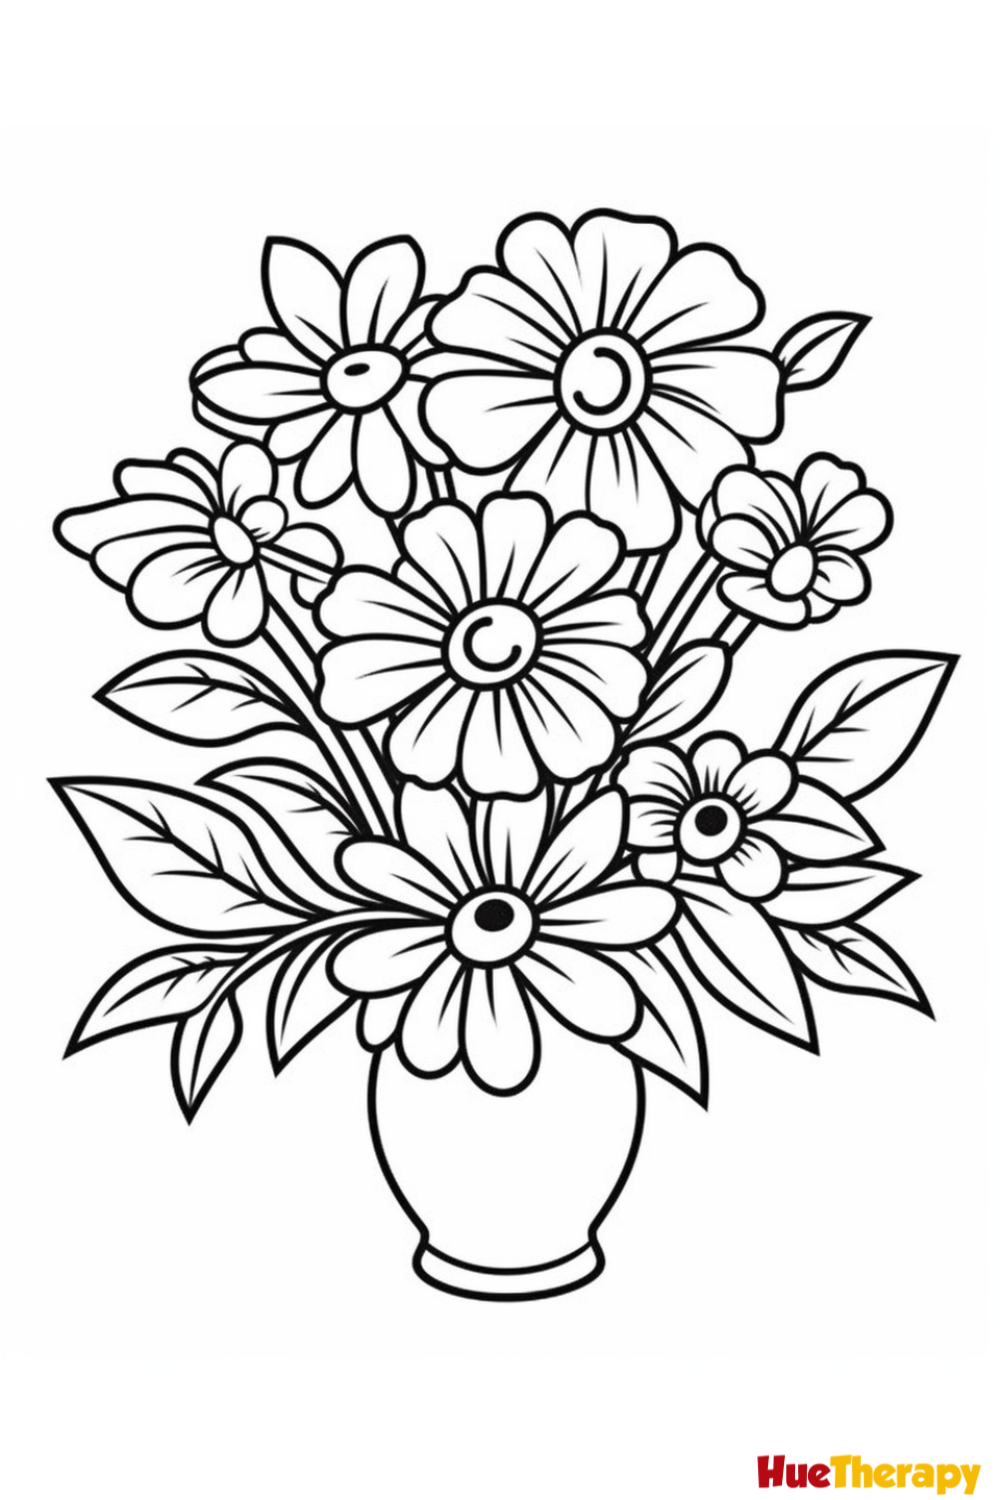 Free Printable Flower Coloring Pages For All Ages with Free Printable Flower Coloring Pages